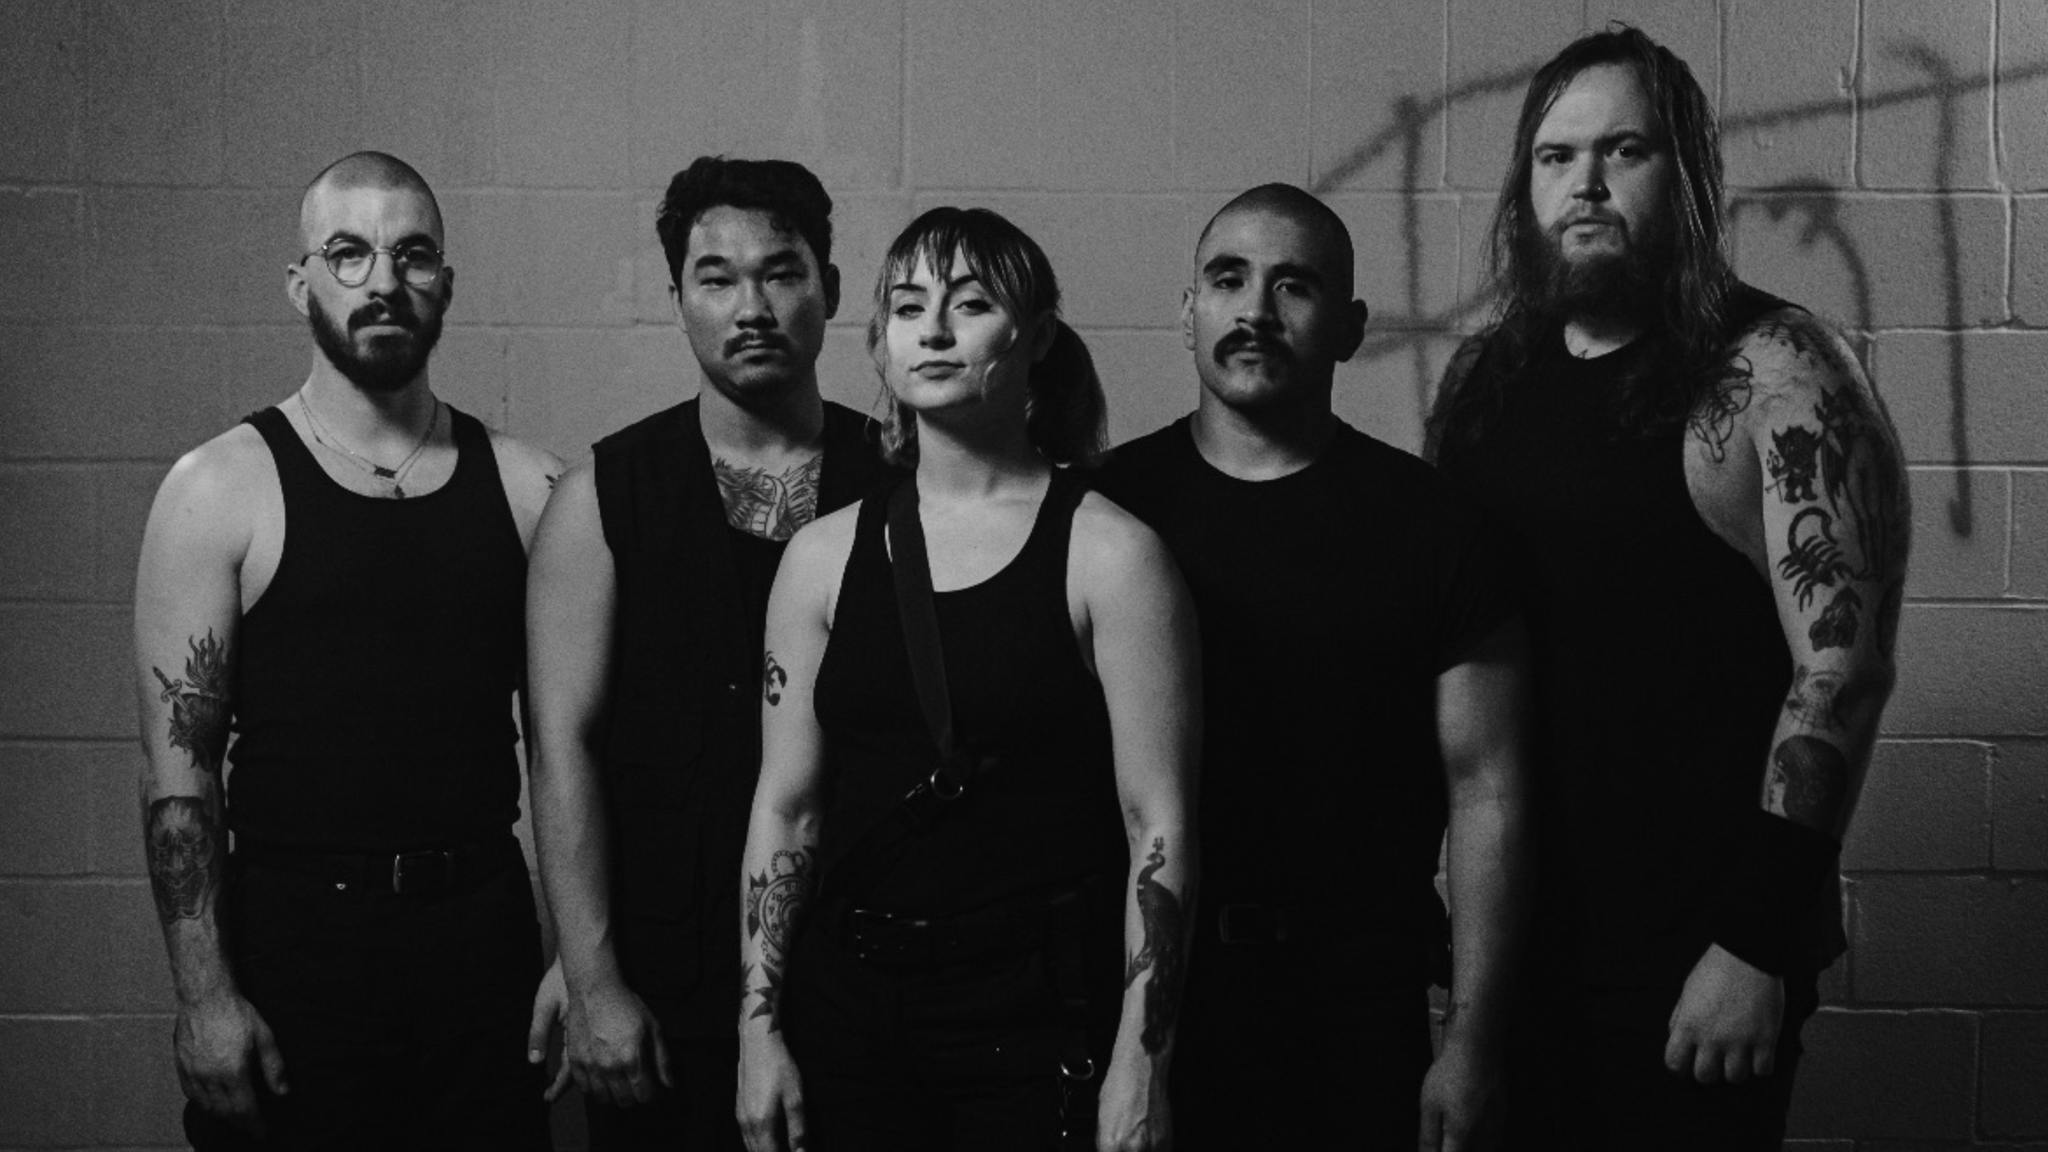 Watch Dying Wish’s new video for Now You’ll Rot